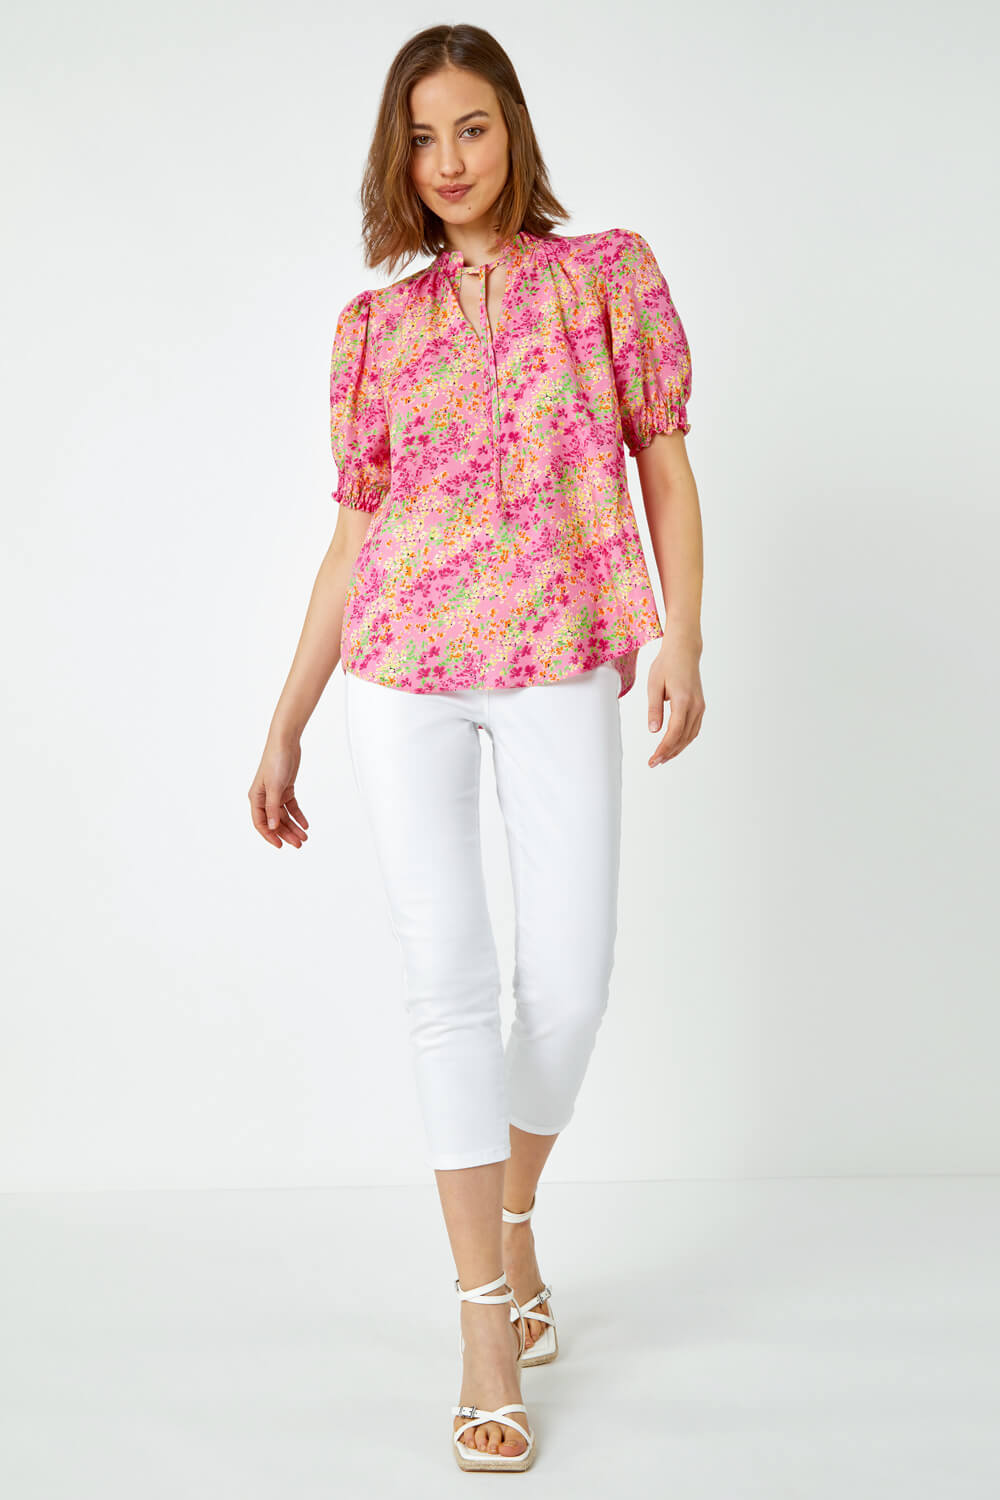 PINK Ditsy Floral Ruffle Neck Blouse, Image 2 of 5